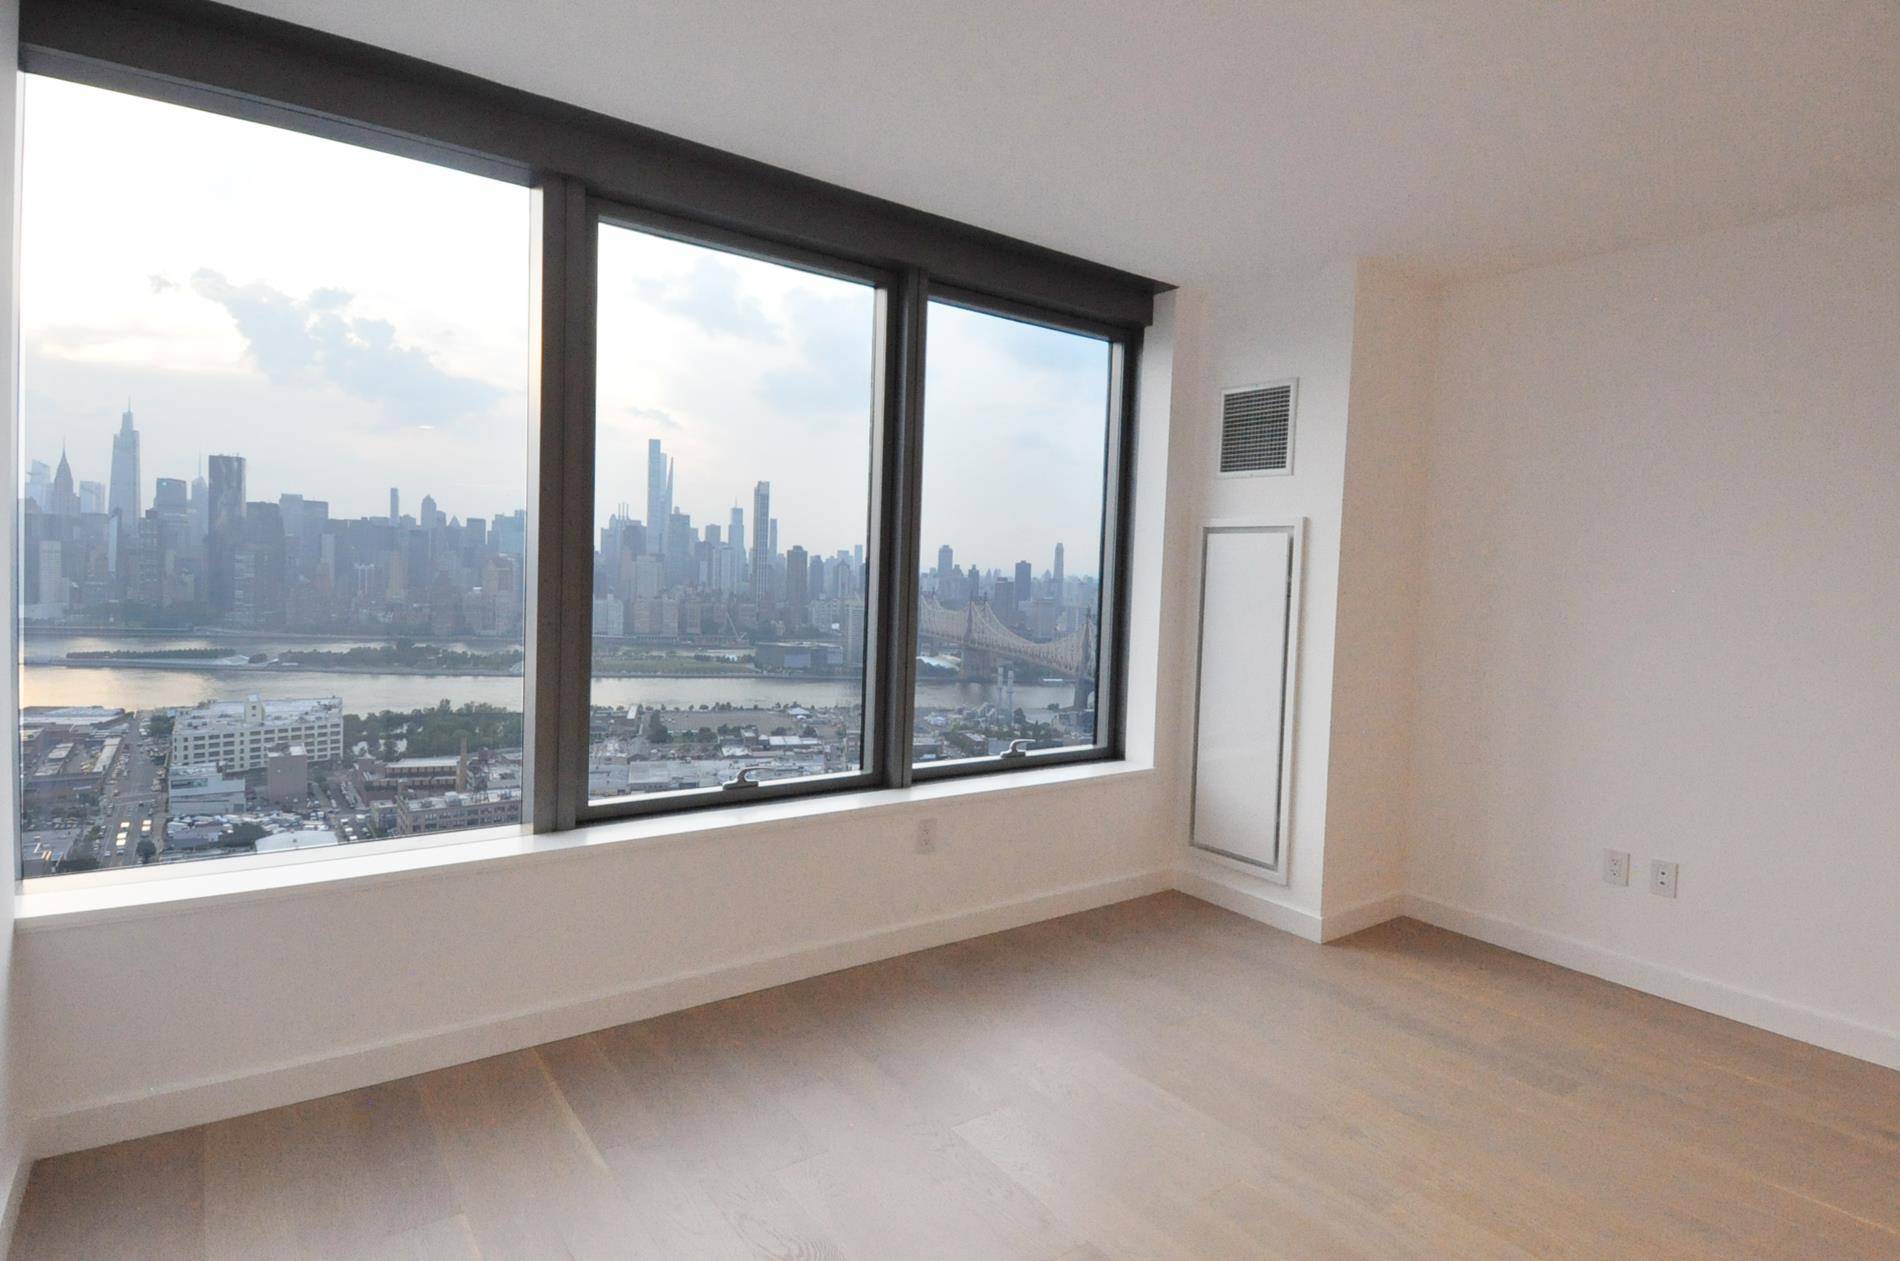 Available immediately Enjoy breathtaking Manhattan views in this stunning brand new 2BR 2BA apartment at luxurious Skyline Tower.